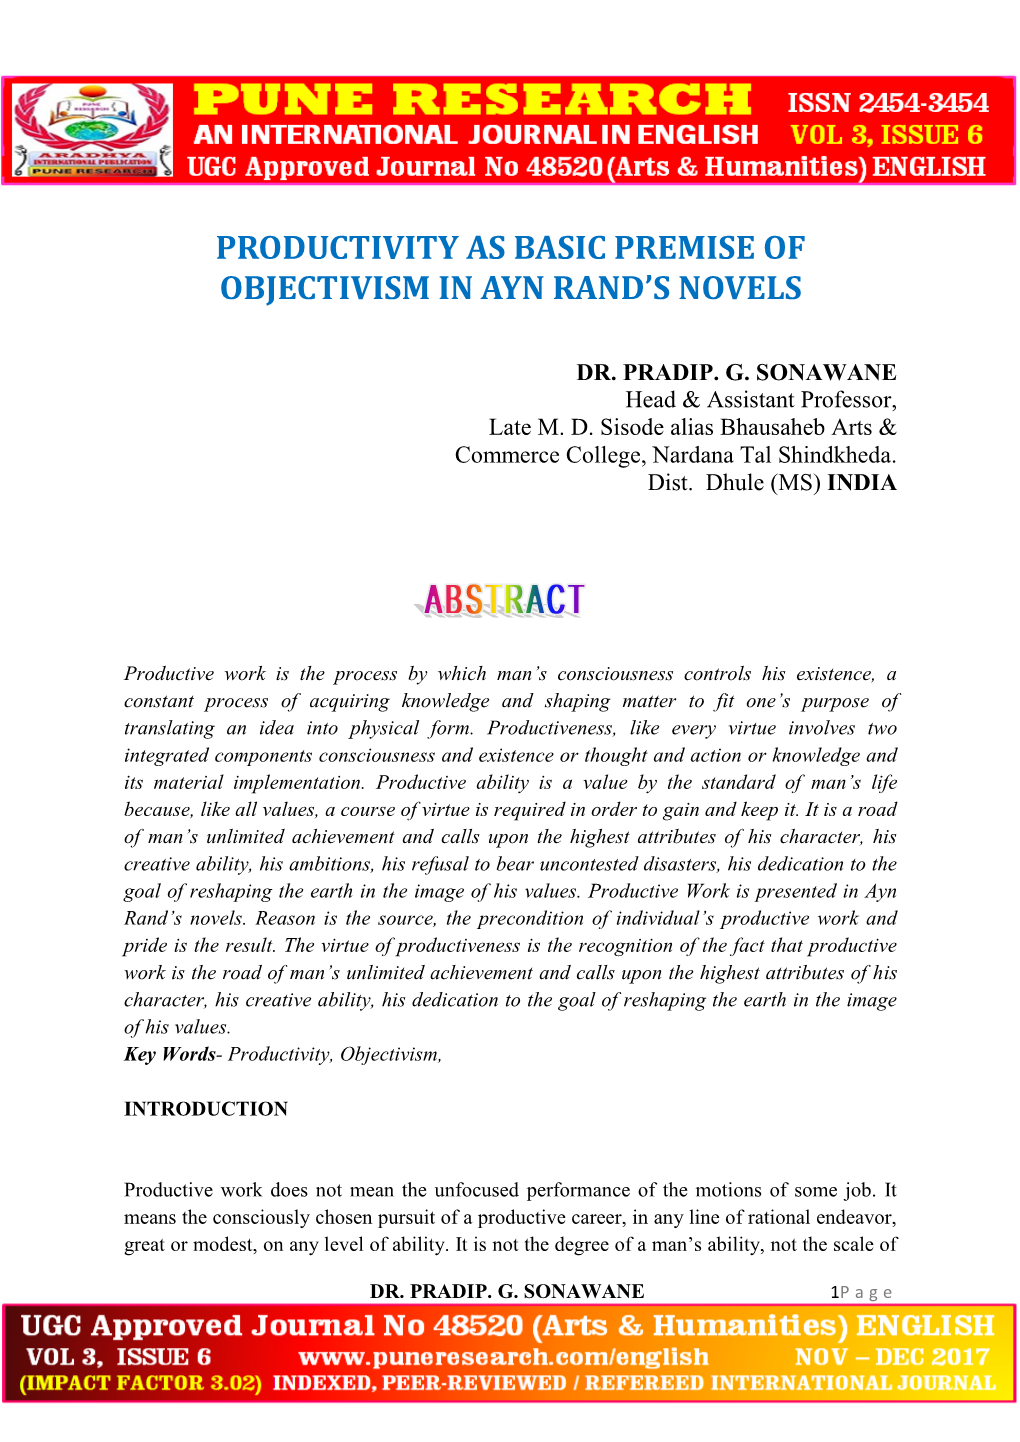 Productivity As Basic Premise of Objectivism in Ayn Rand's Novels